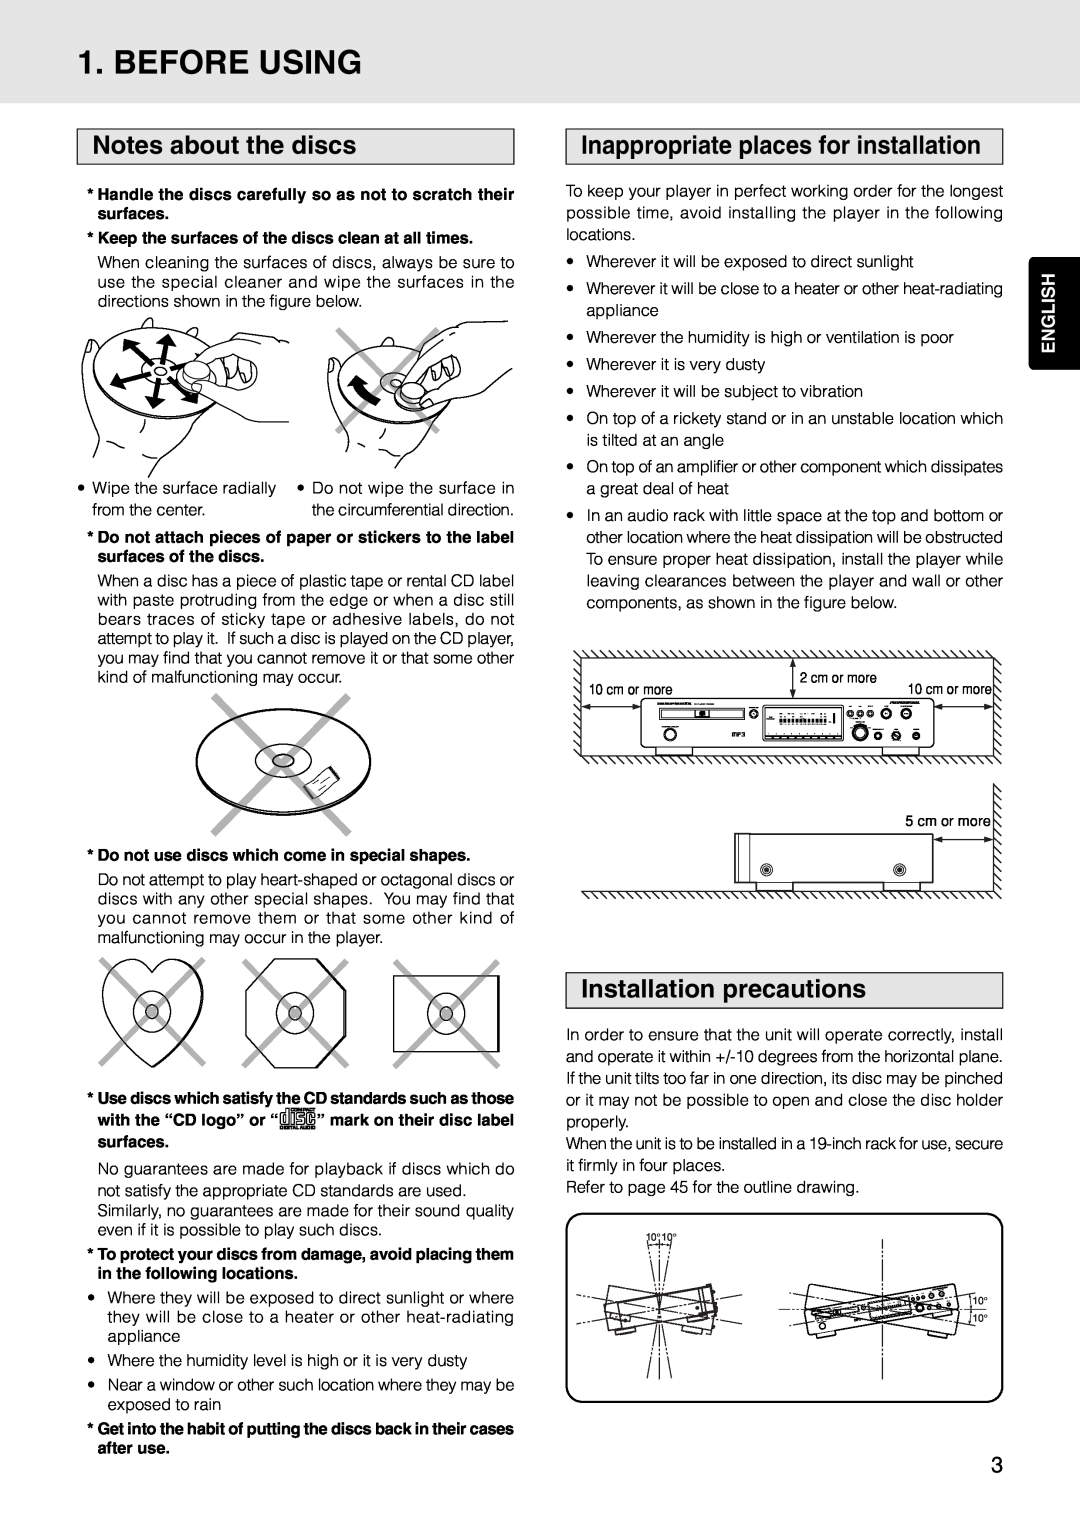 Marantz PMD325 manual Before Using, Notes about the discs, Inappropriate places for installation, Installation precautions 